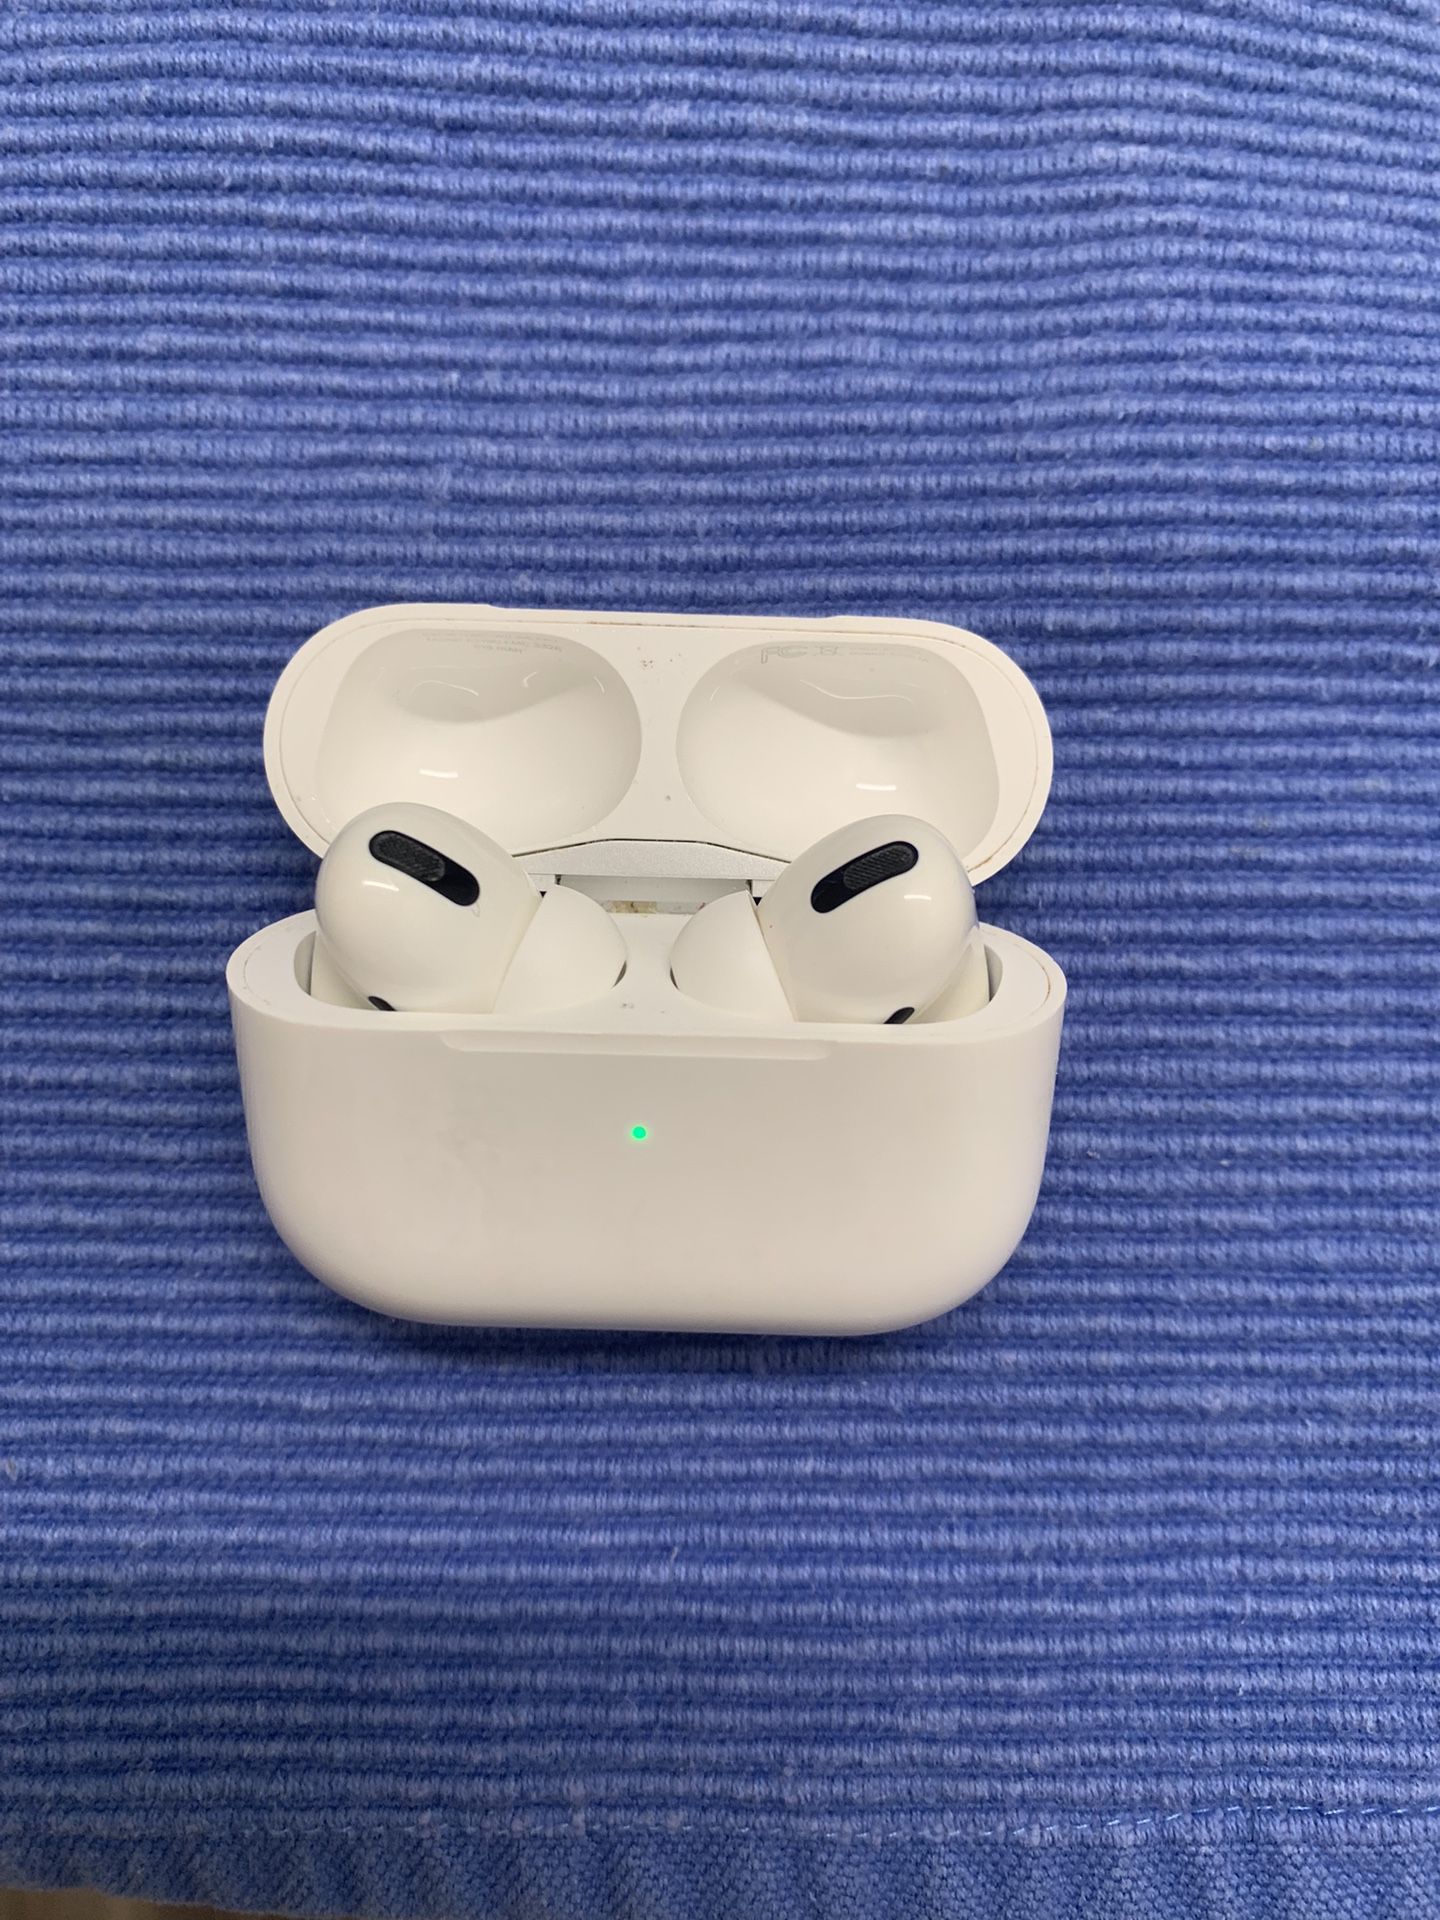 AirPod Pro + Charging Case (1st Generation)